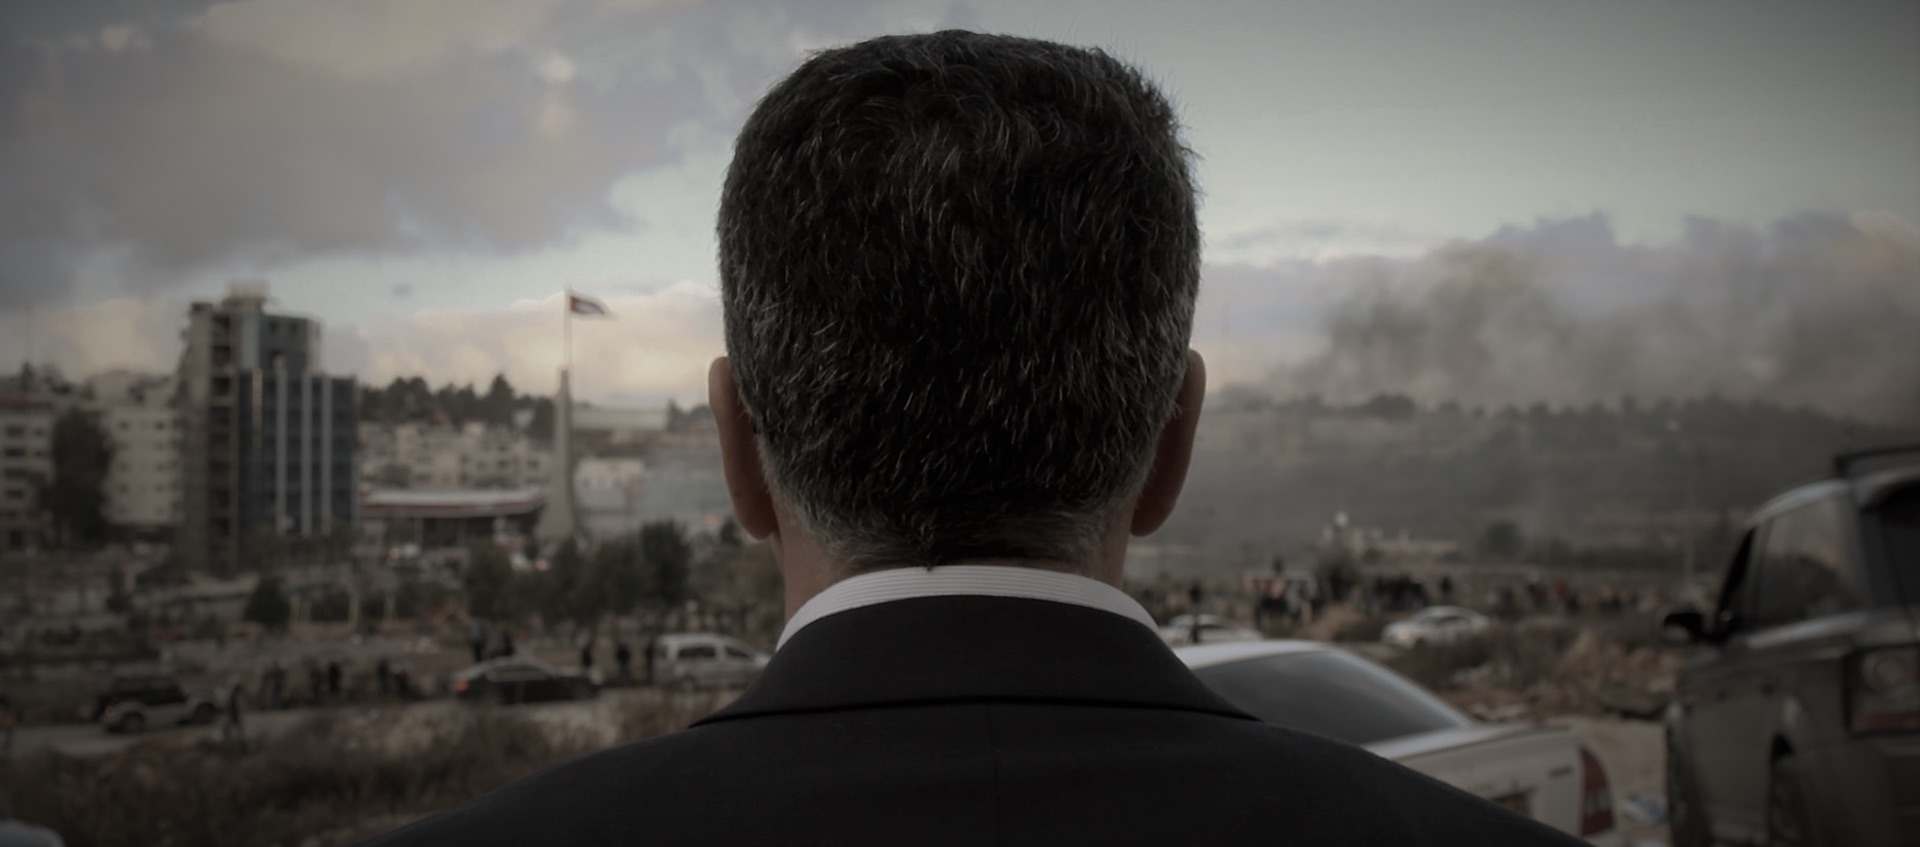 A man with dark hair in a suit is seen from behind in the foreground; the man is looking out at a city skyline under a gray, cloudy sky